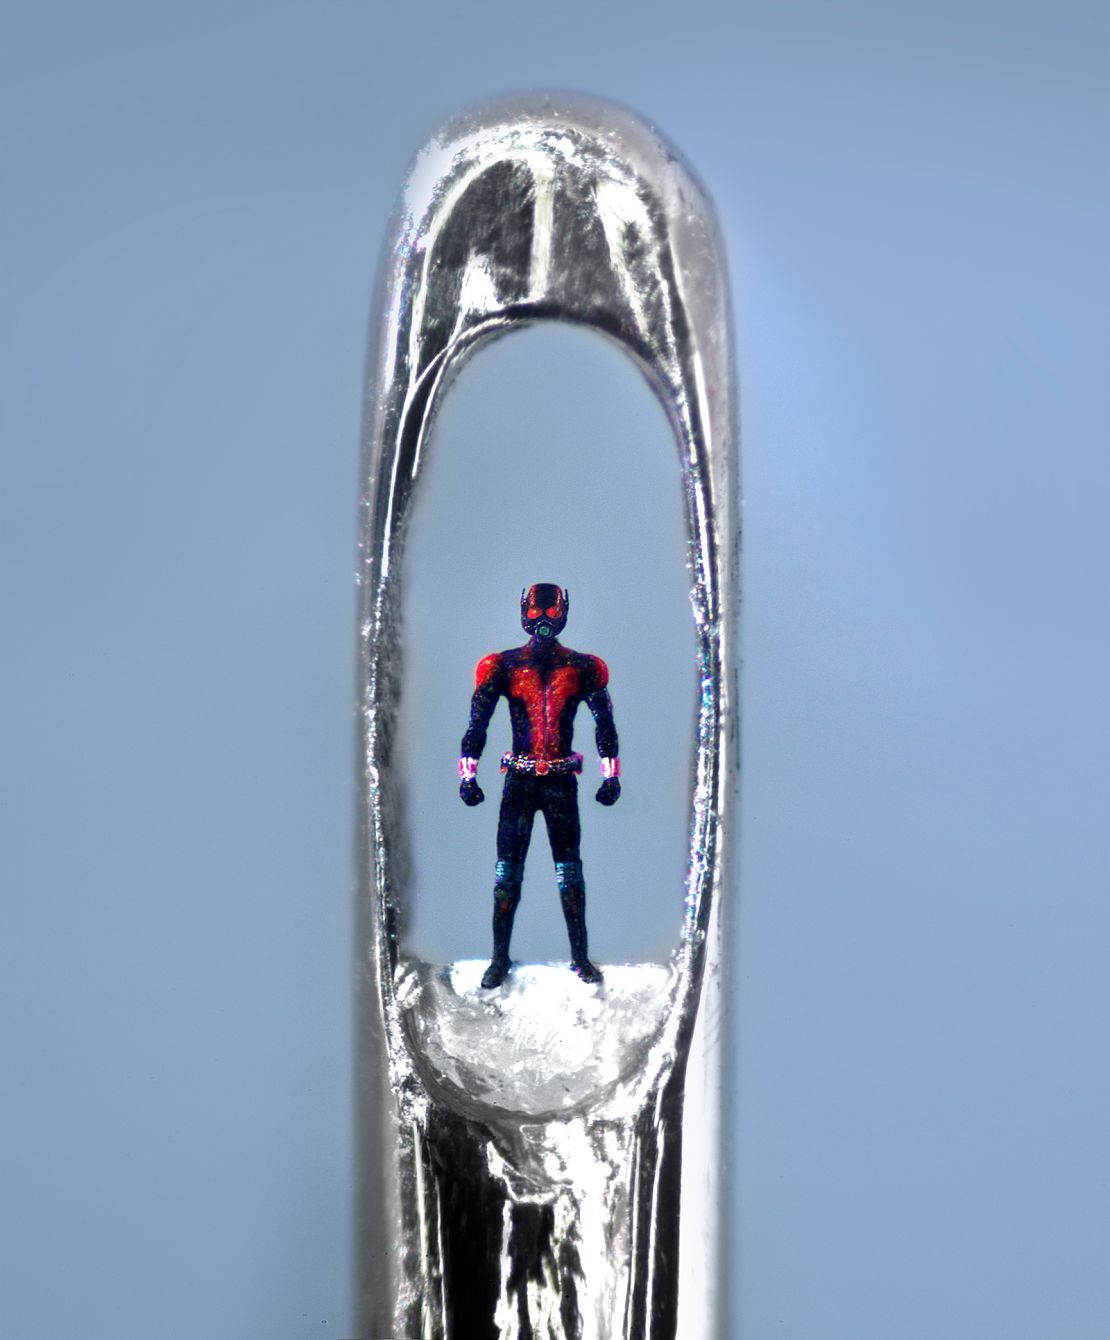 The artist uses his eyelash to paint sculptures and can only move between each heartbeat in order not to make a mistake. Here is his sculpture "Ant-man."